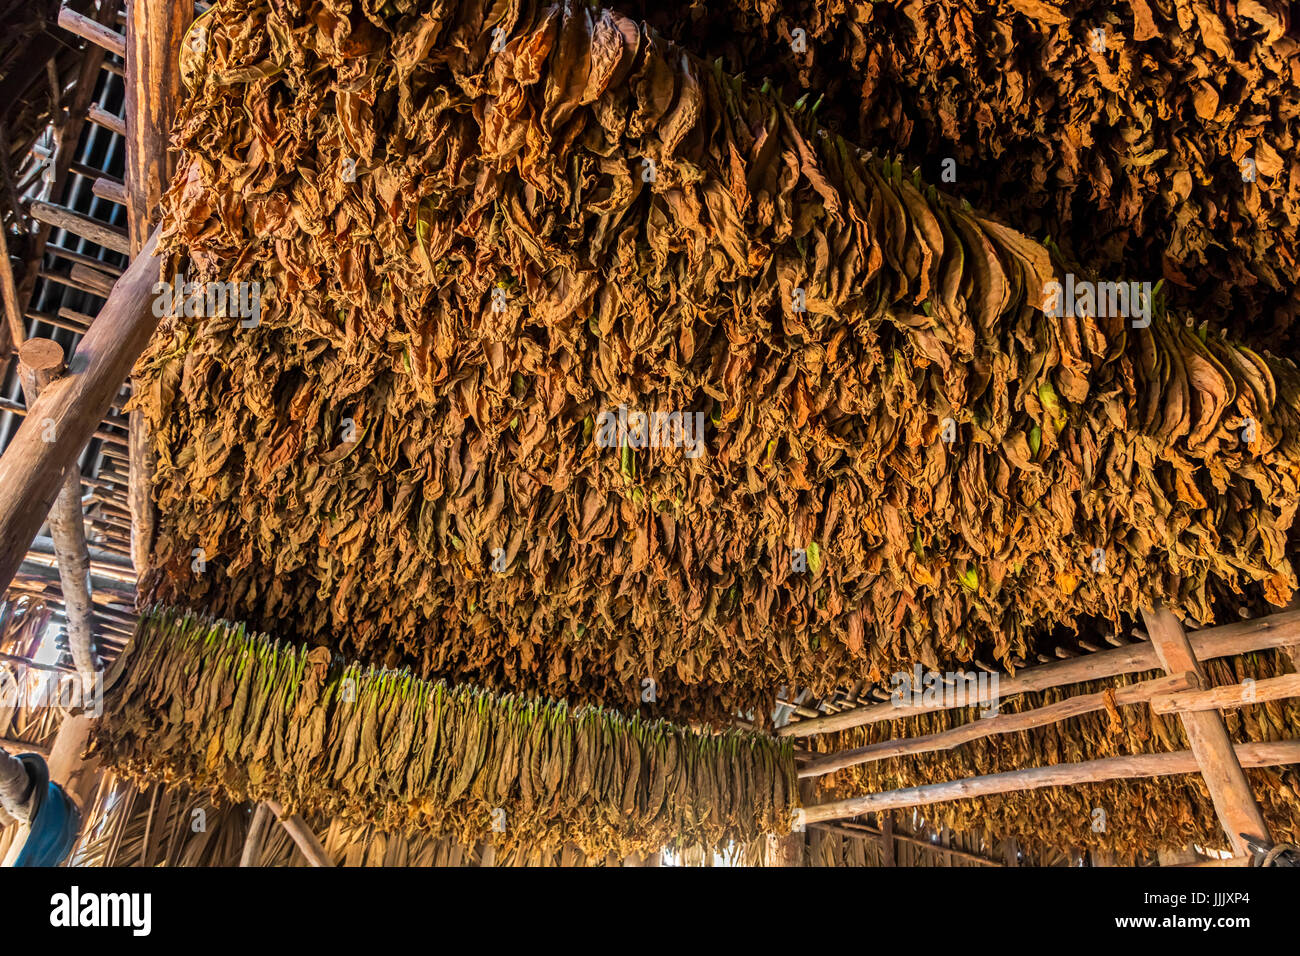 Tobacco uses for making cigars dries inside a barns in the Vinales Valley - VINALES, CUBA Stock Photo